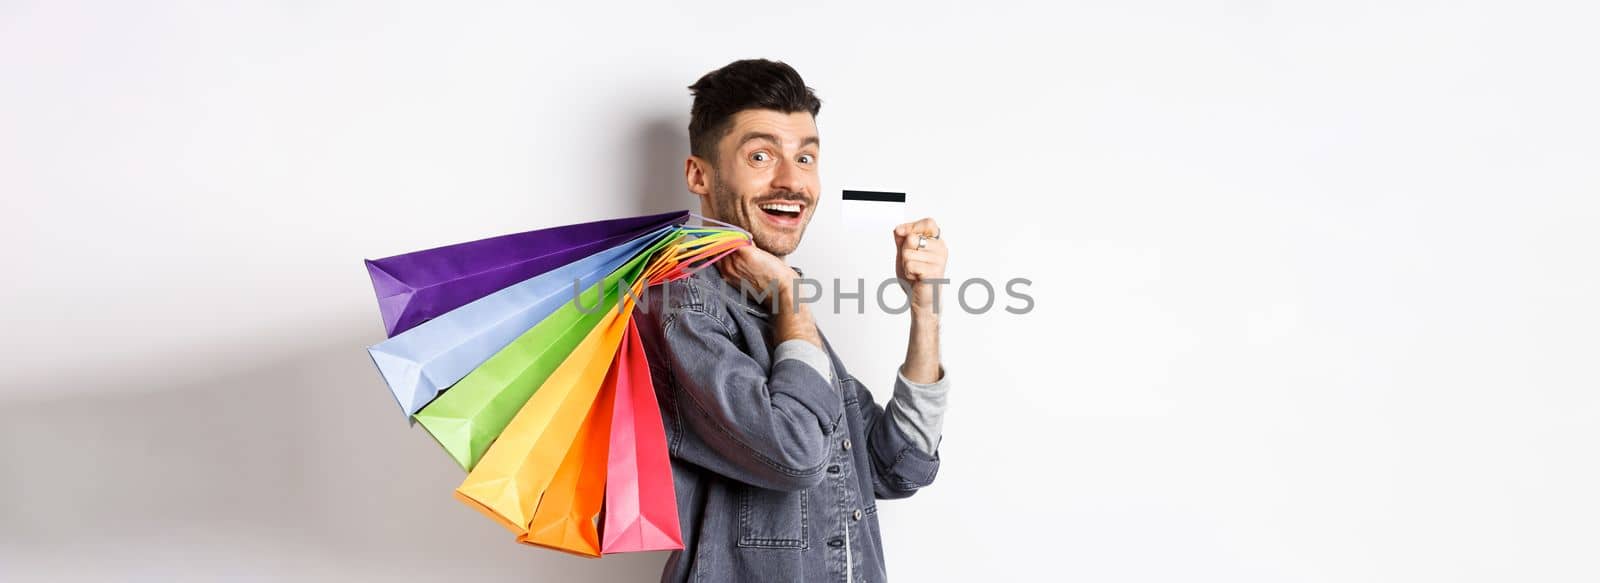 Cheerful guy going on shopping with credit card, holding bags on shoulder and smiling excited at camera, white background.